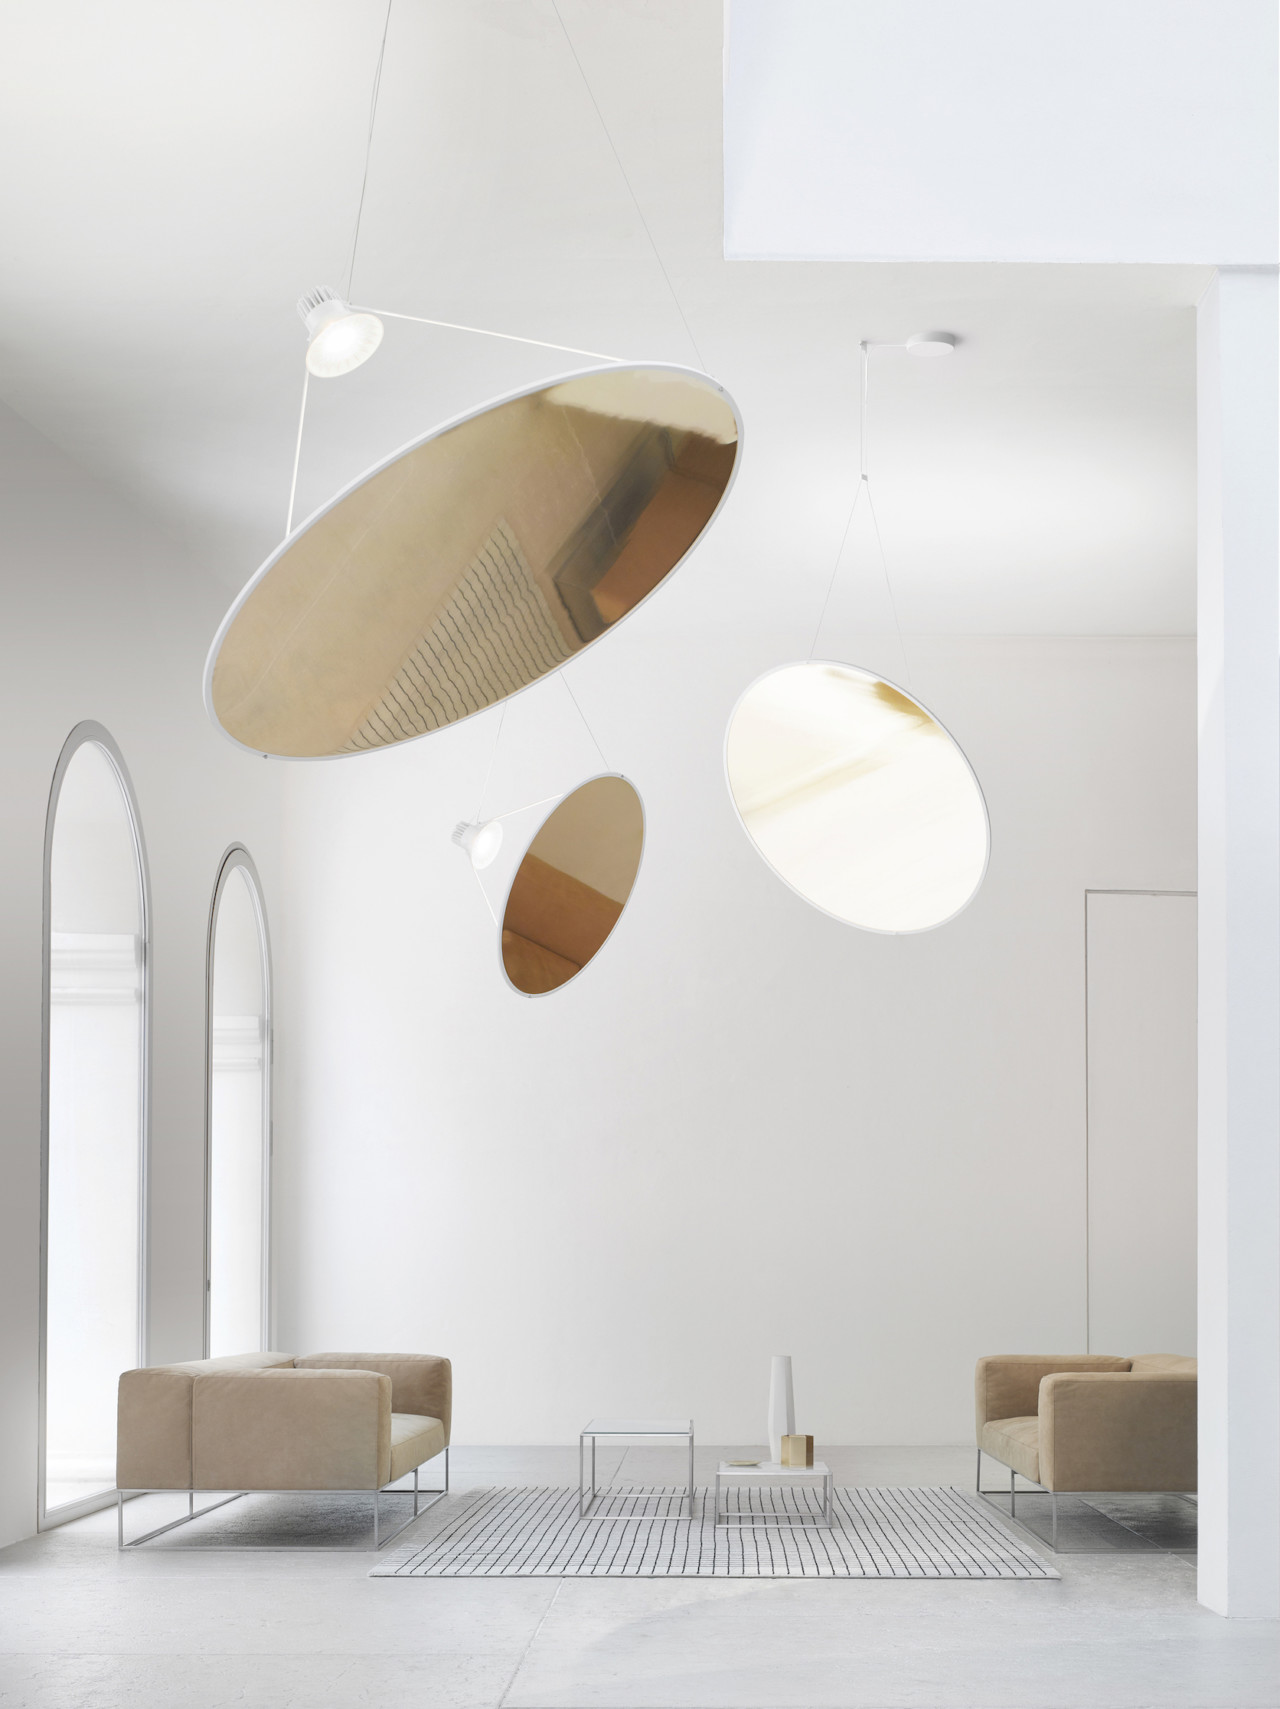 Amisol: A Large Pendant Lamp That Actually Takes up a Minimal Amount of Volume